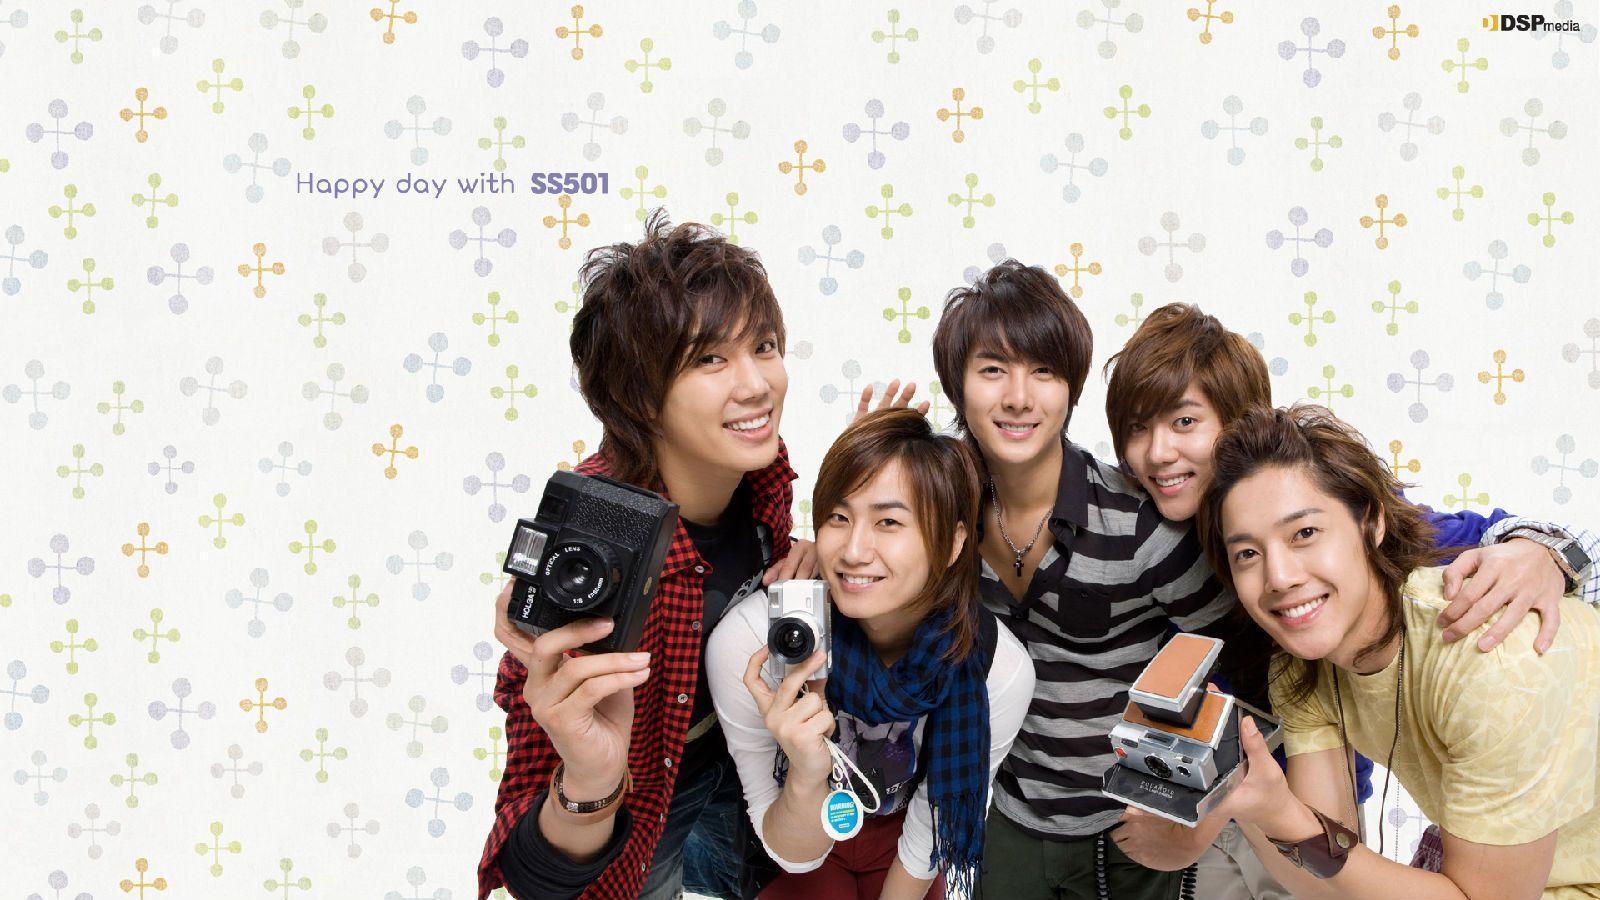 Official Photo SS501 USB Free Wallpaper. Double S photo diary